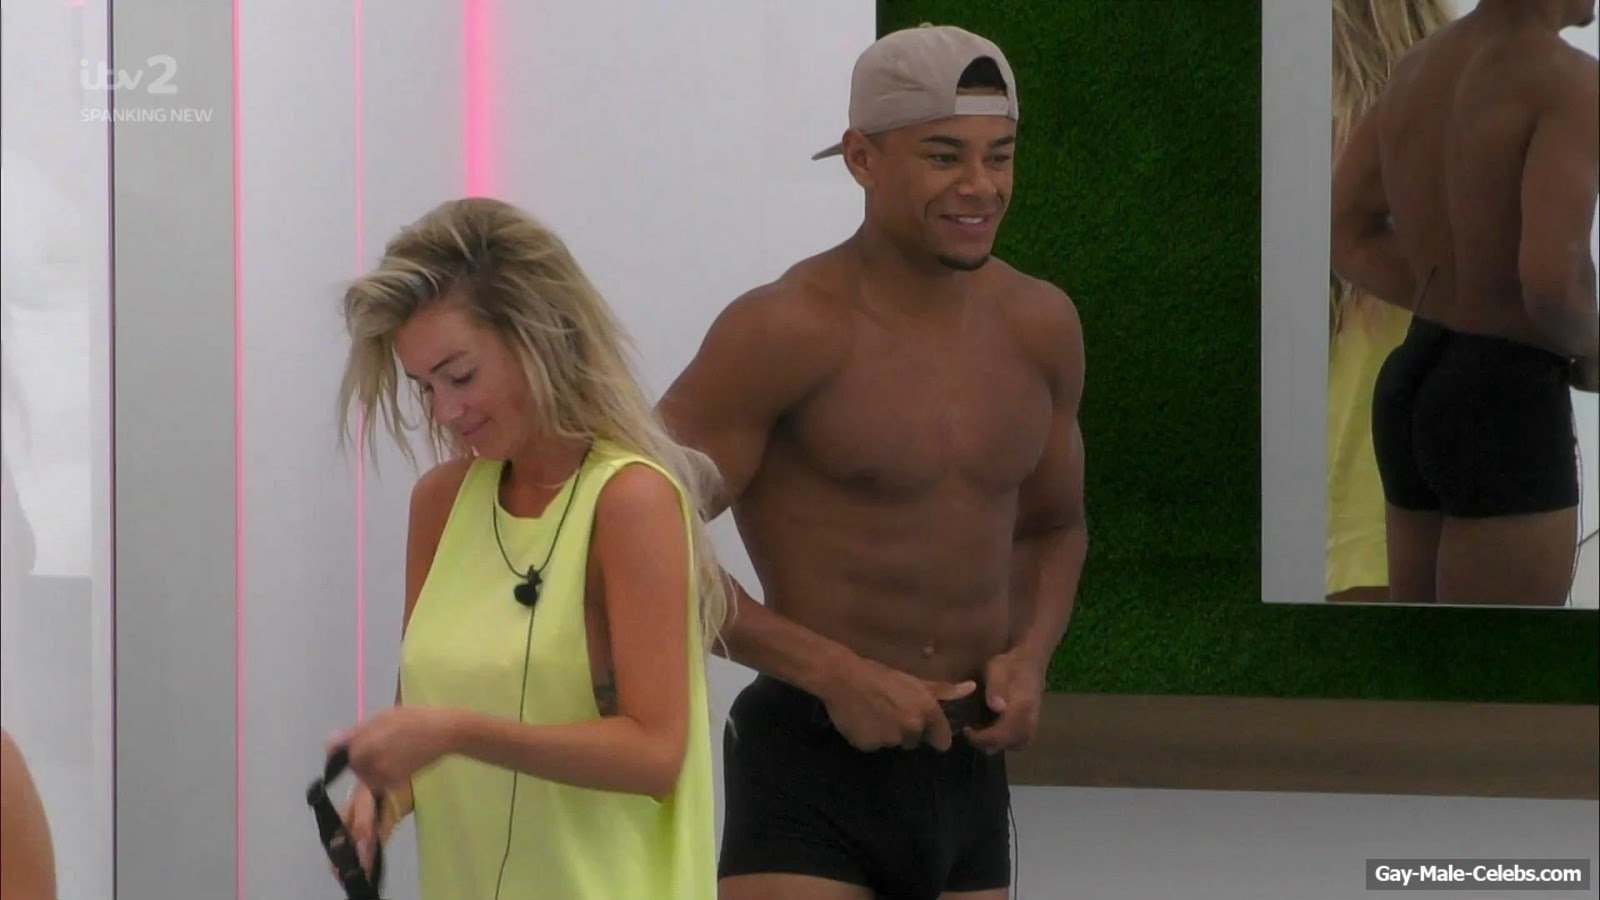 Wes Nelson Shows Off His Muscle Ass In Love Island